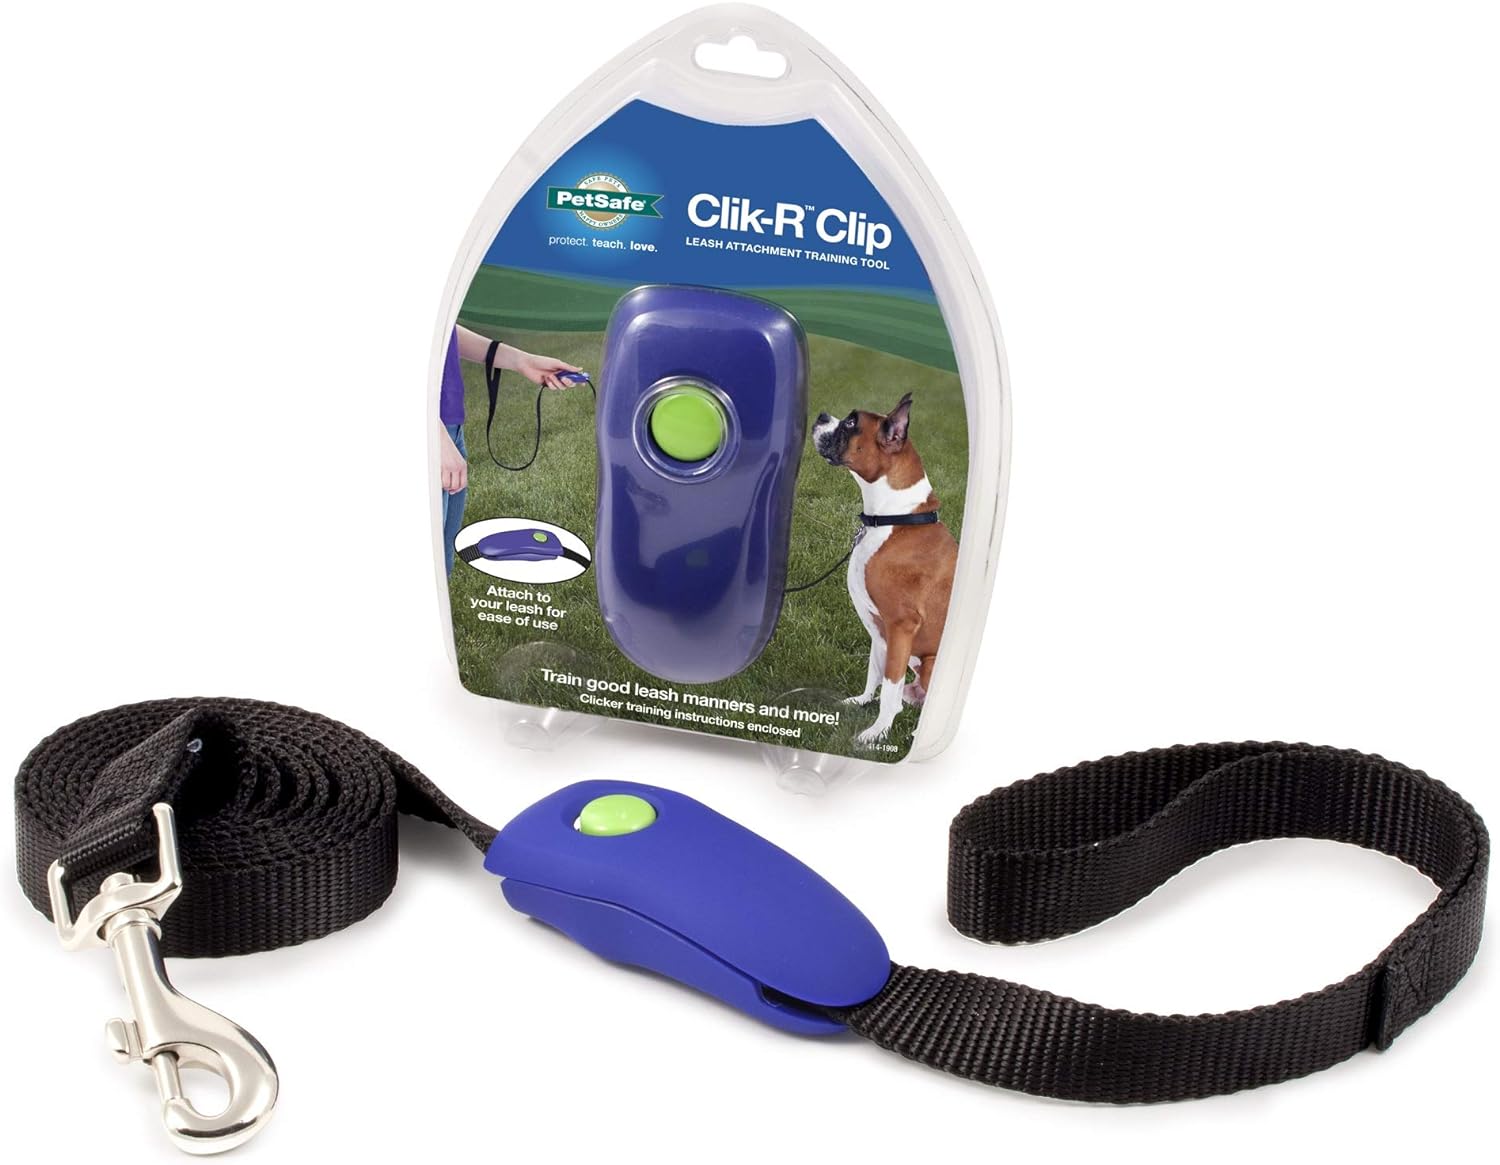 PetSafe Clik-R Clip Training System, Trainer Clicker for Dogs, Attaches to Lead